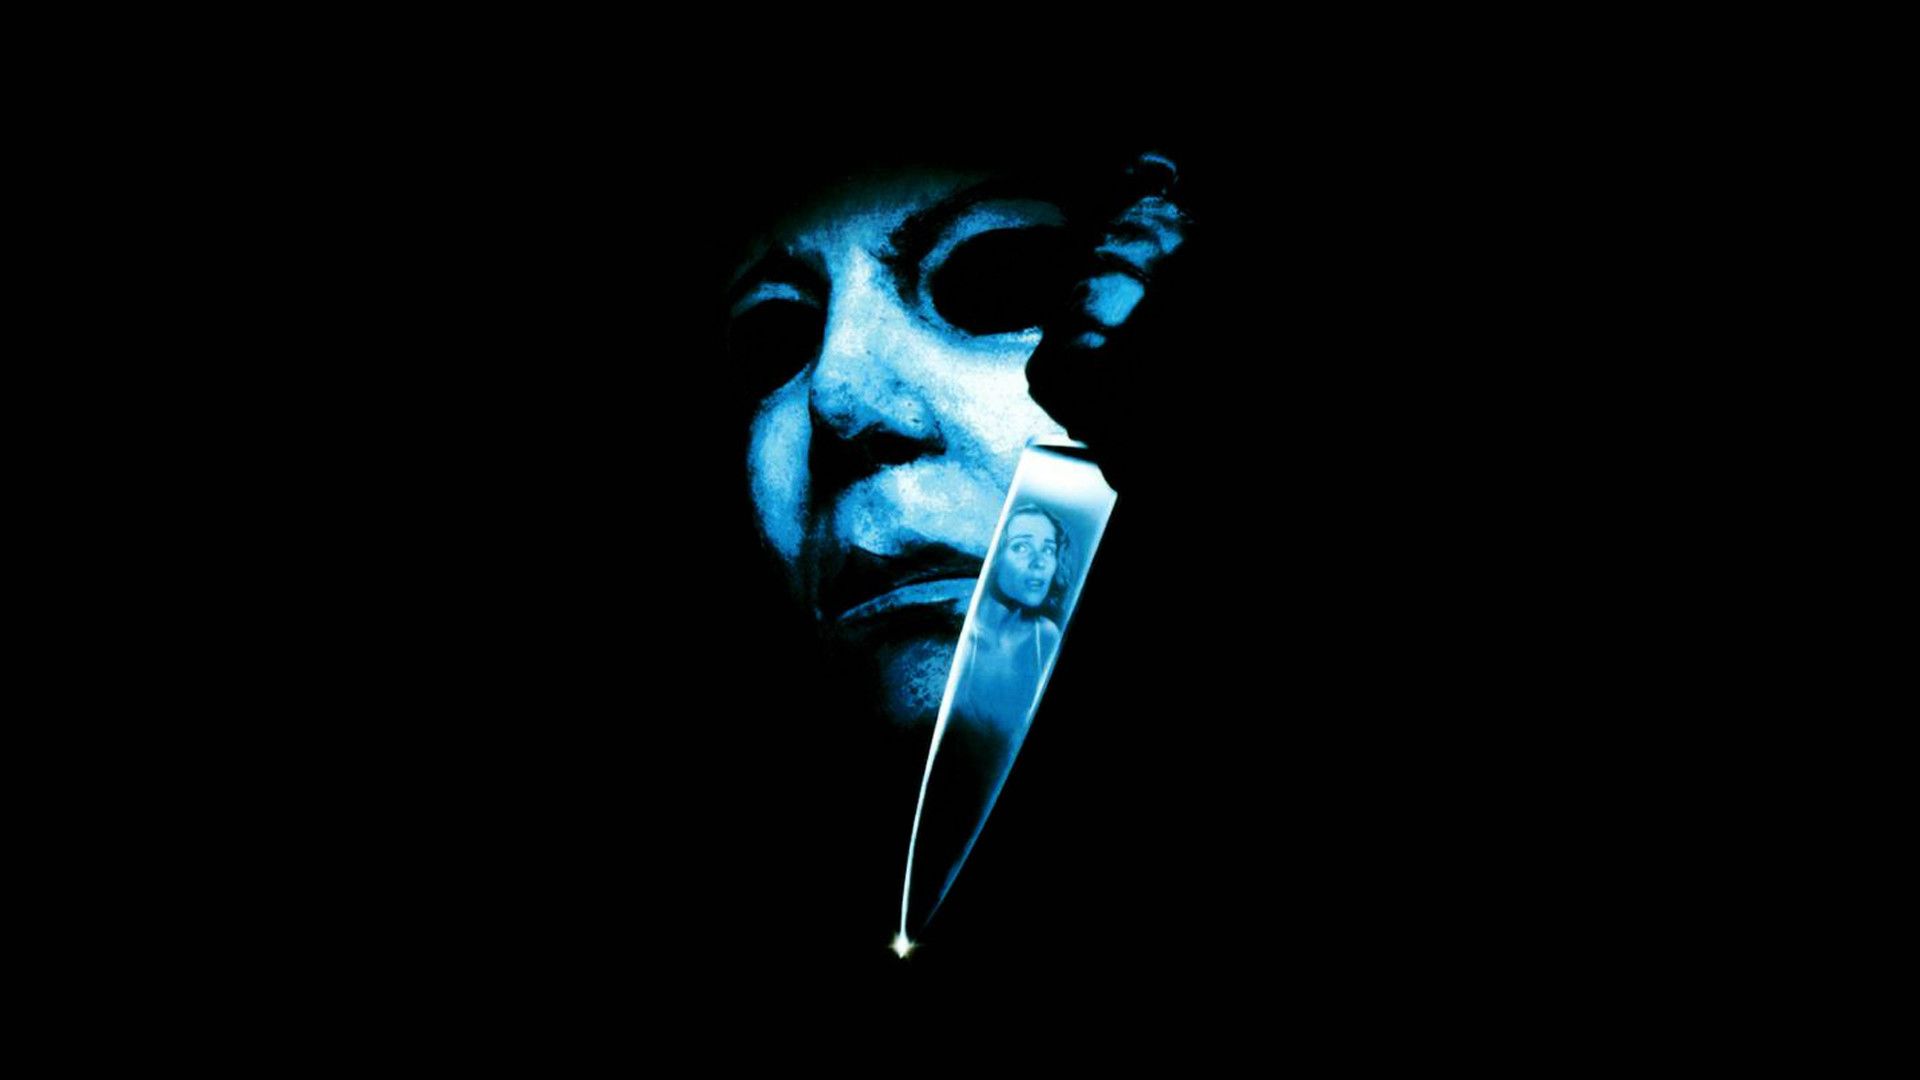 Halloween 2018 movie poster with Michael Myers holding a knife - Horror